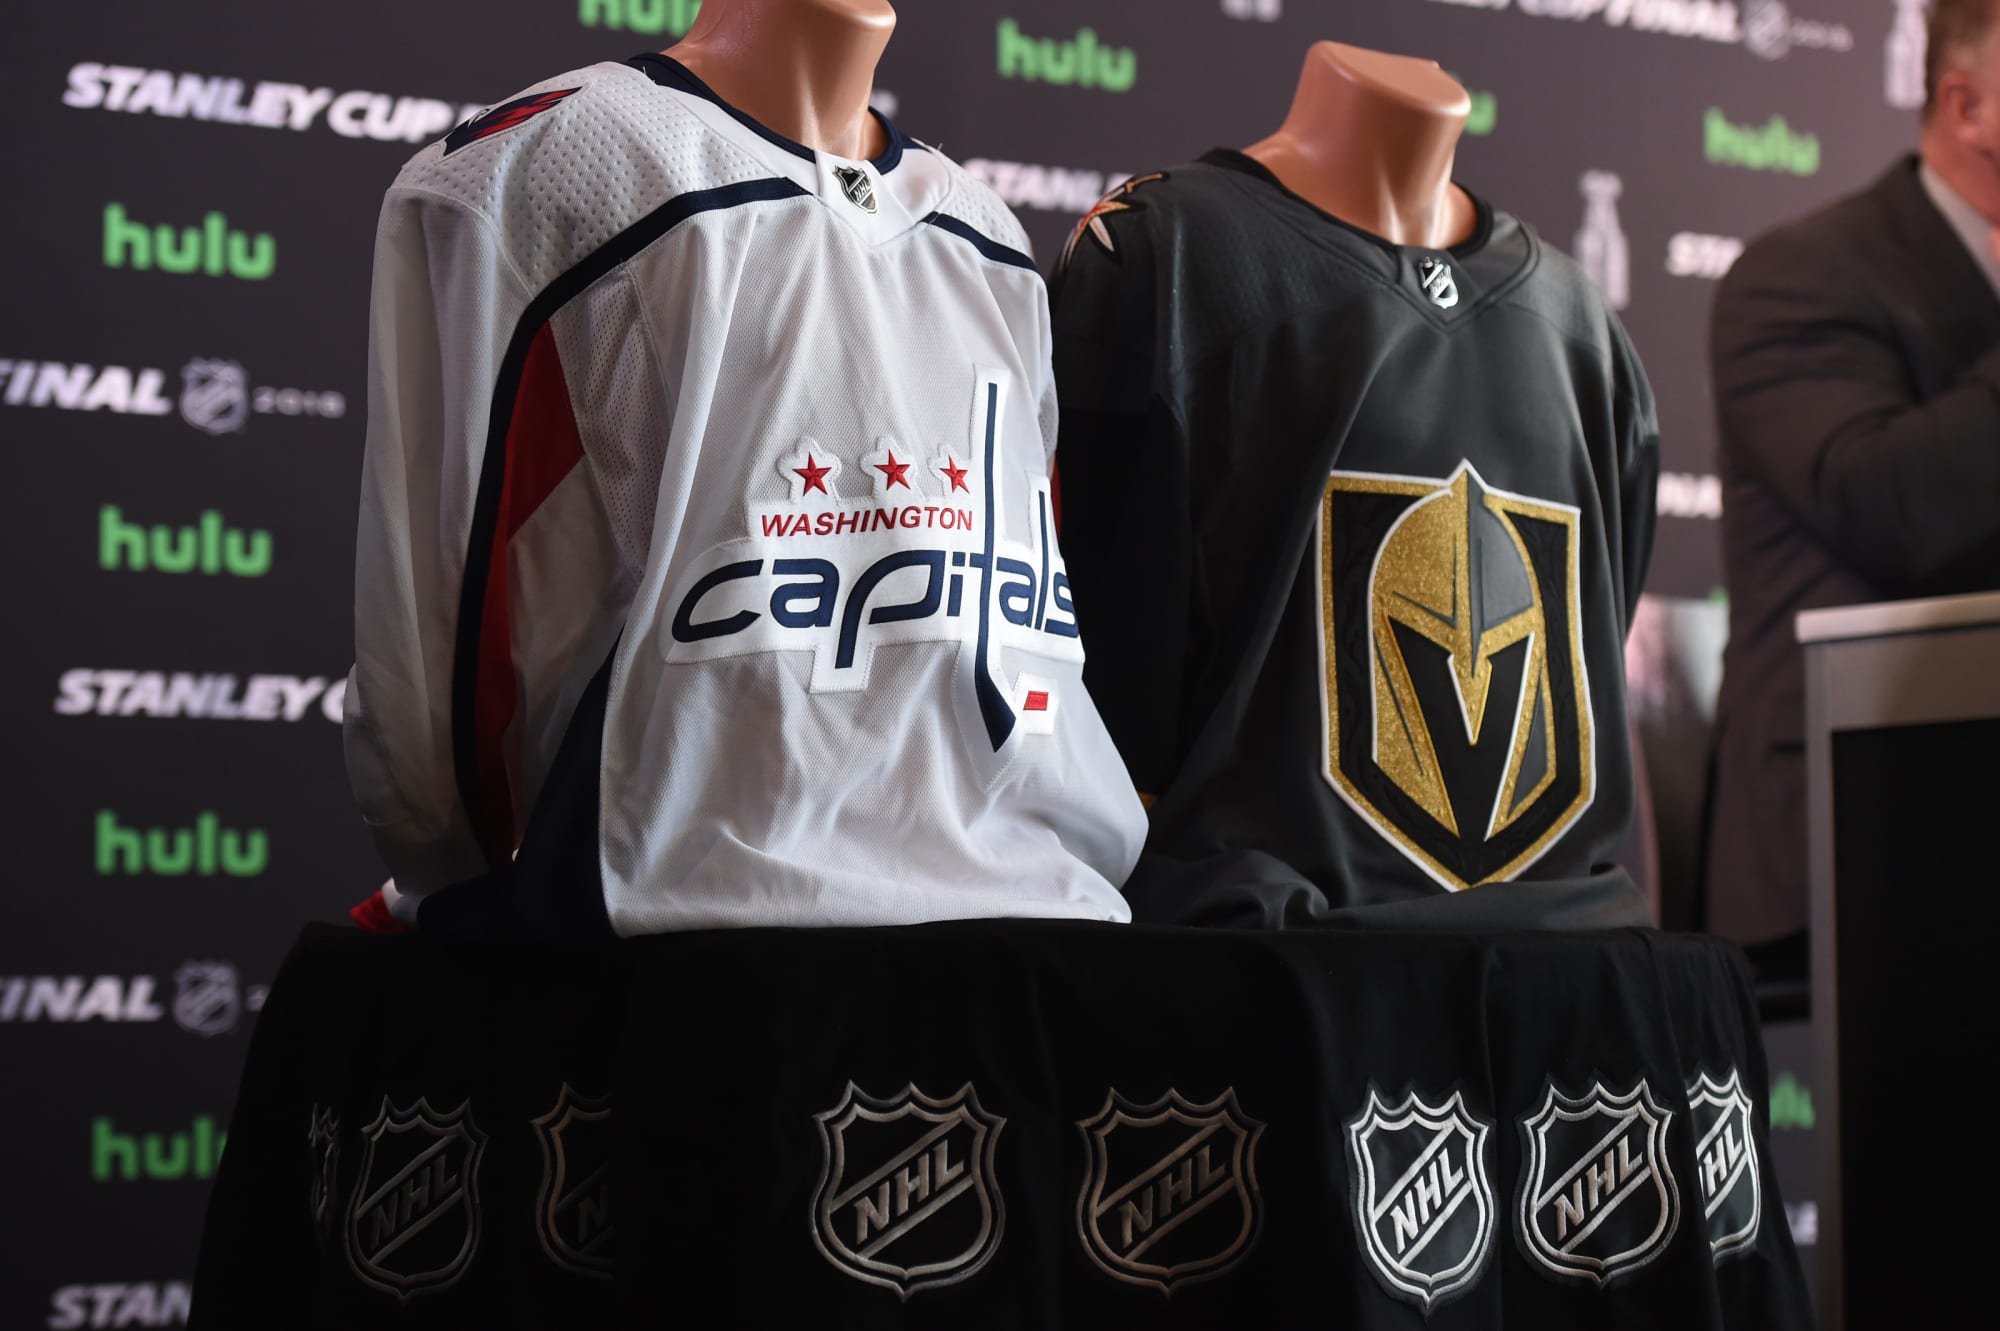 2018 Stanley Cup: Washington Capitals win vs. Golden Knights